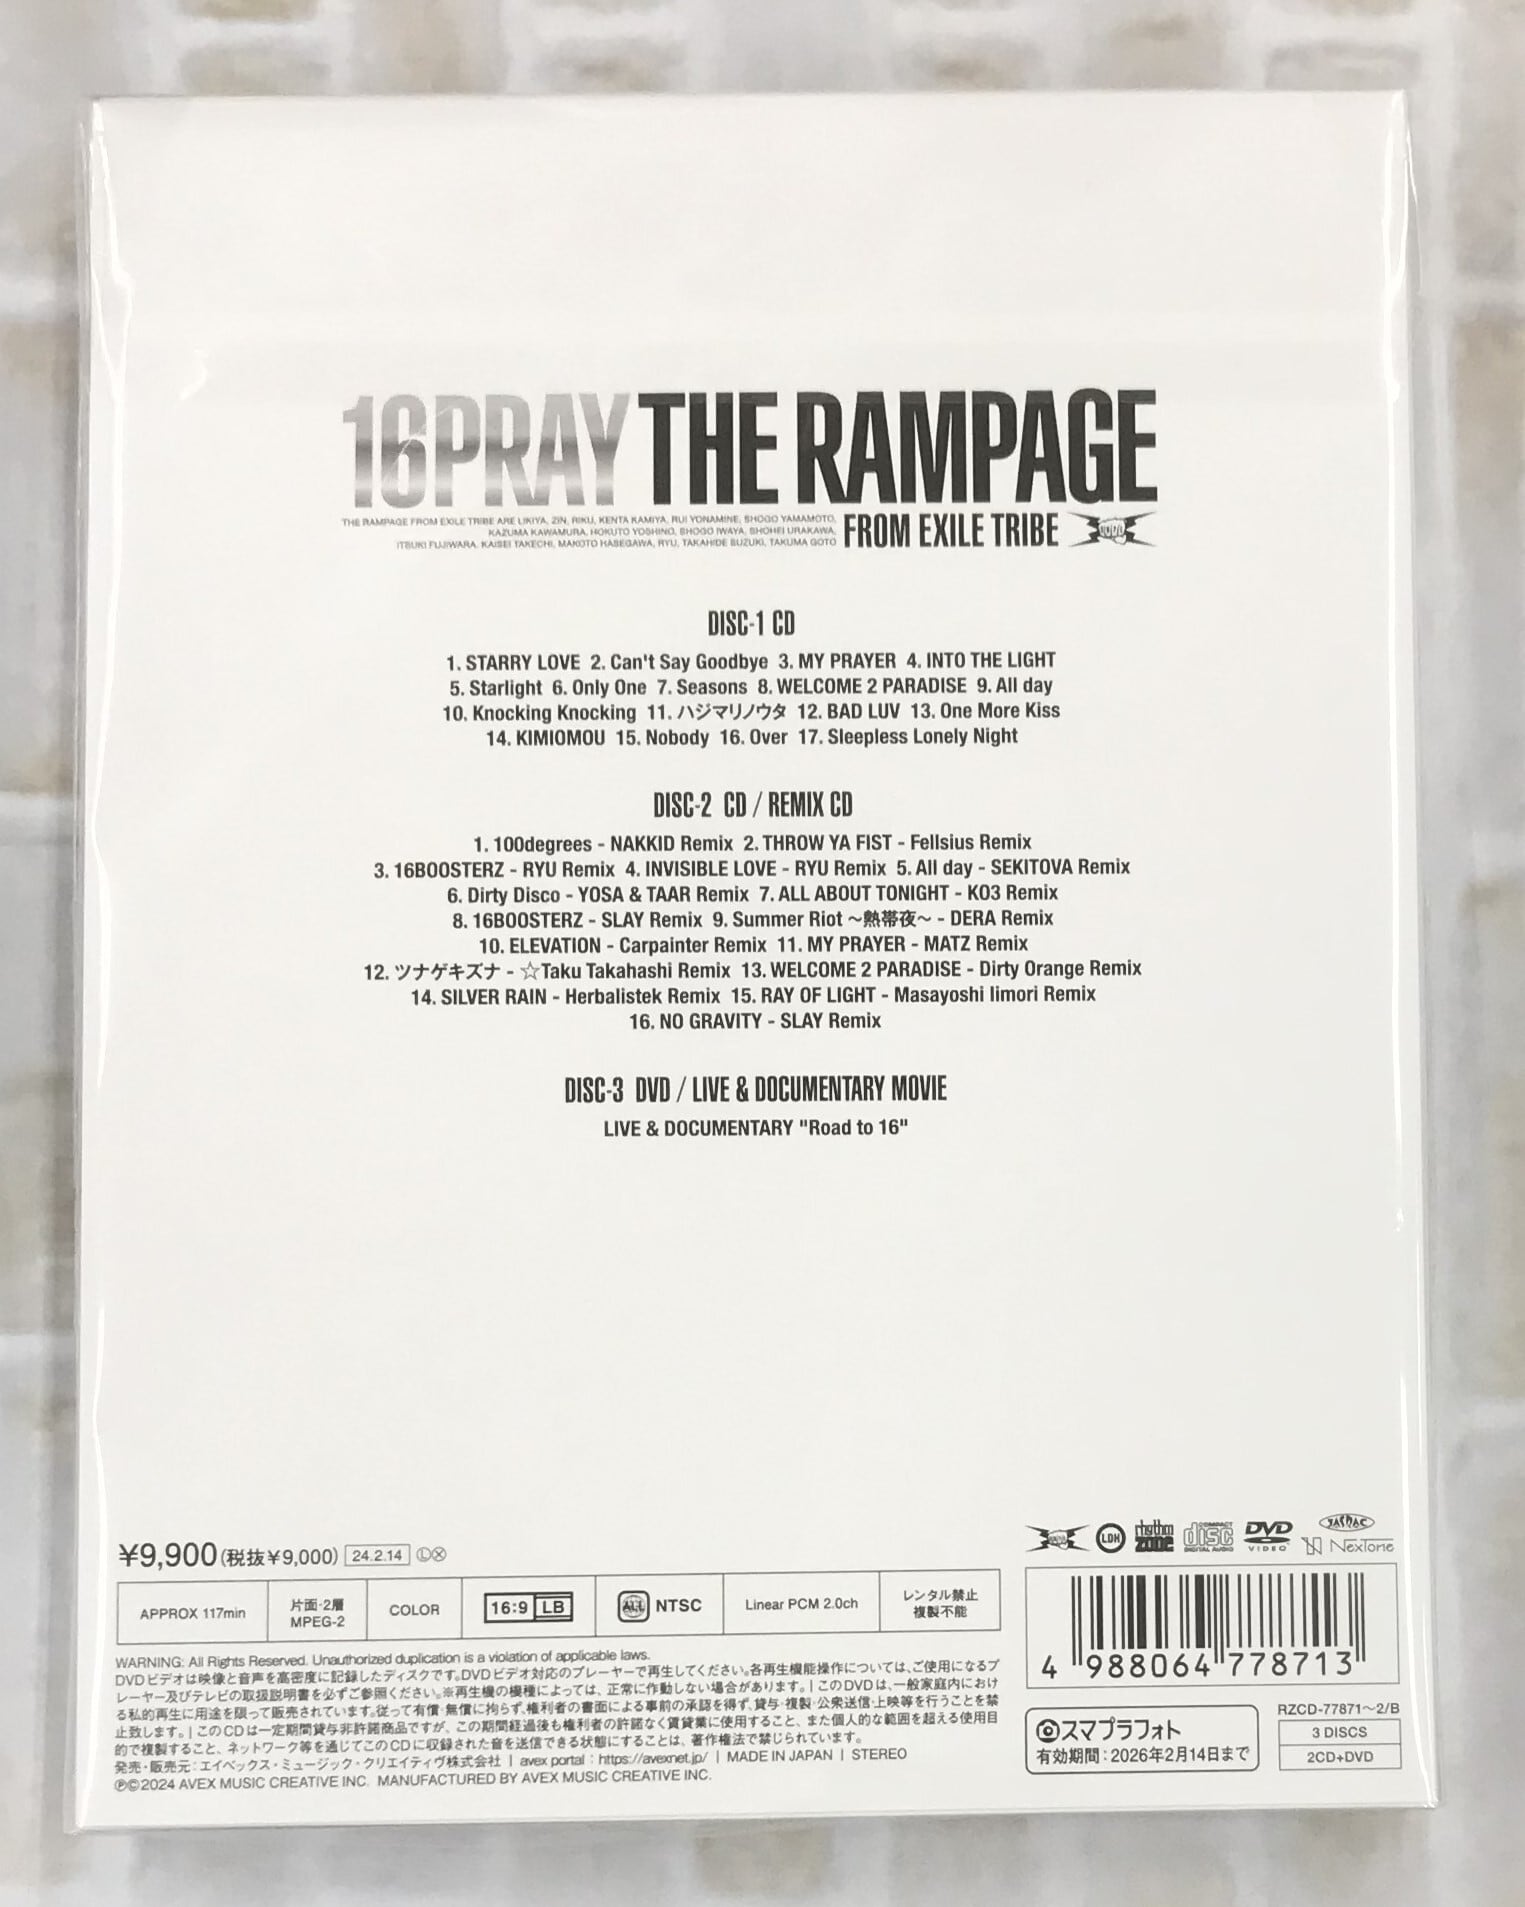 THE RAMPAGE from EXILE TRIBE / 16PRAY / LIVE & DOCUMENTARY盤 (2CD+